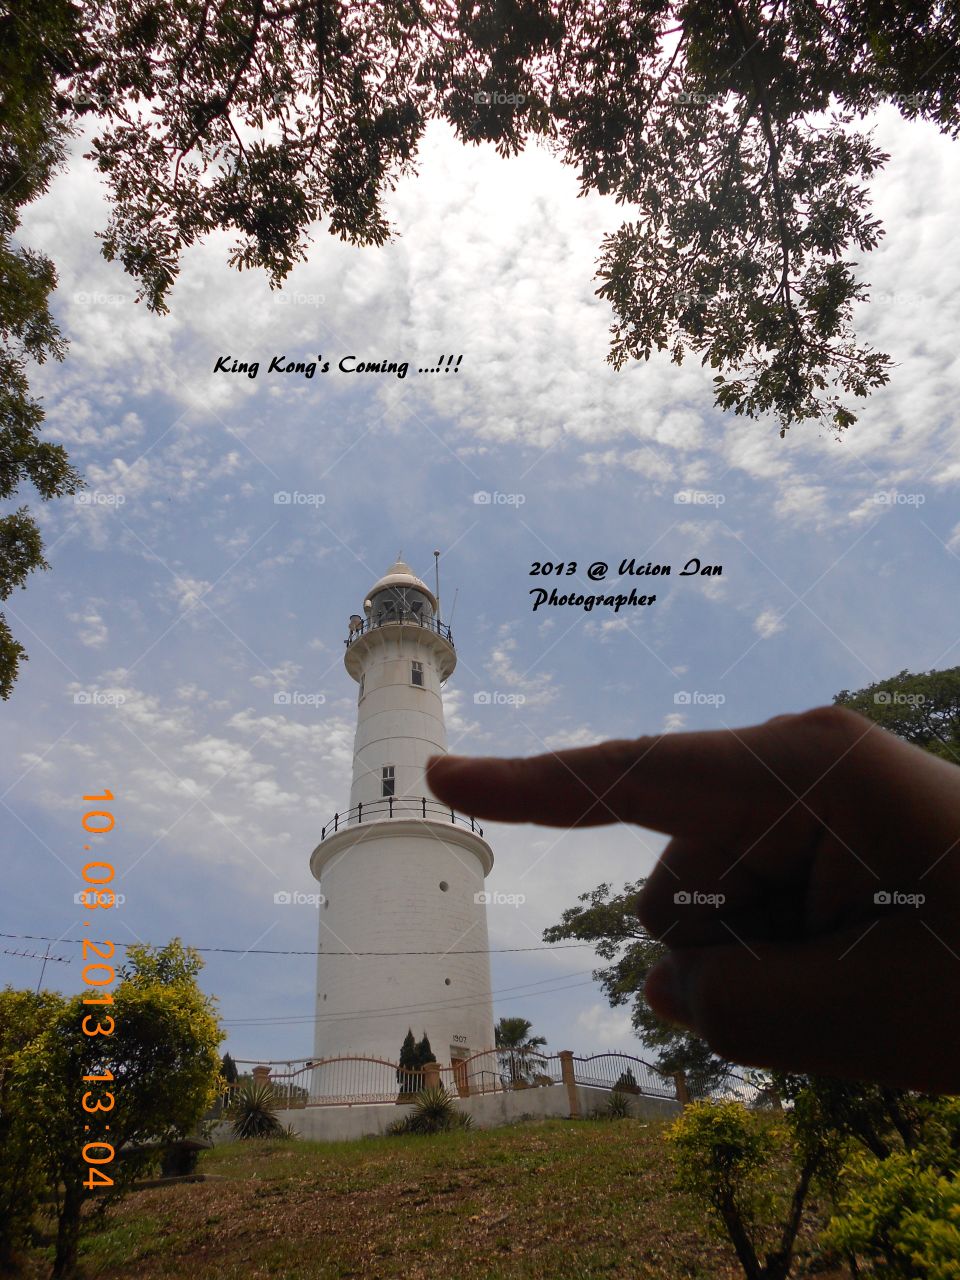 Kuala Selangor-Malaysia. How Small is your Finger.
世界虽小, 可梦想很大。